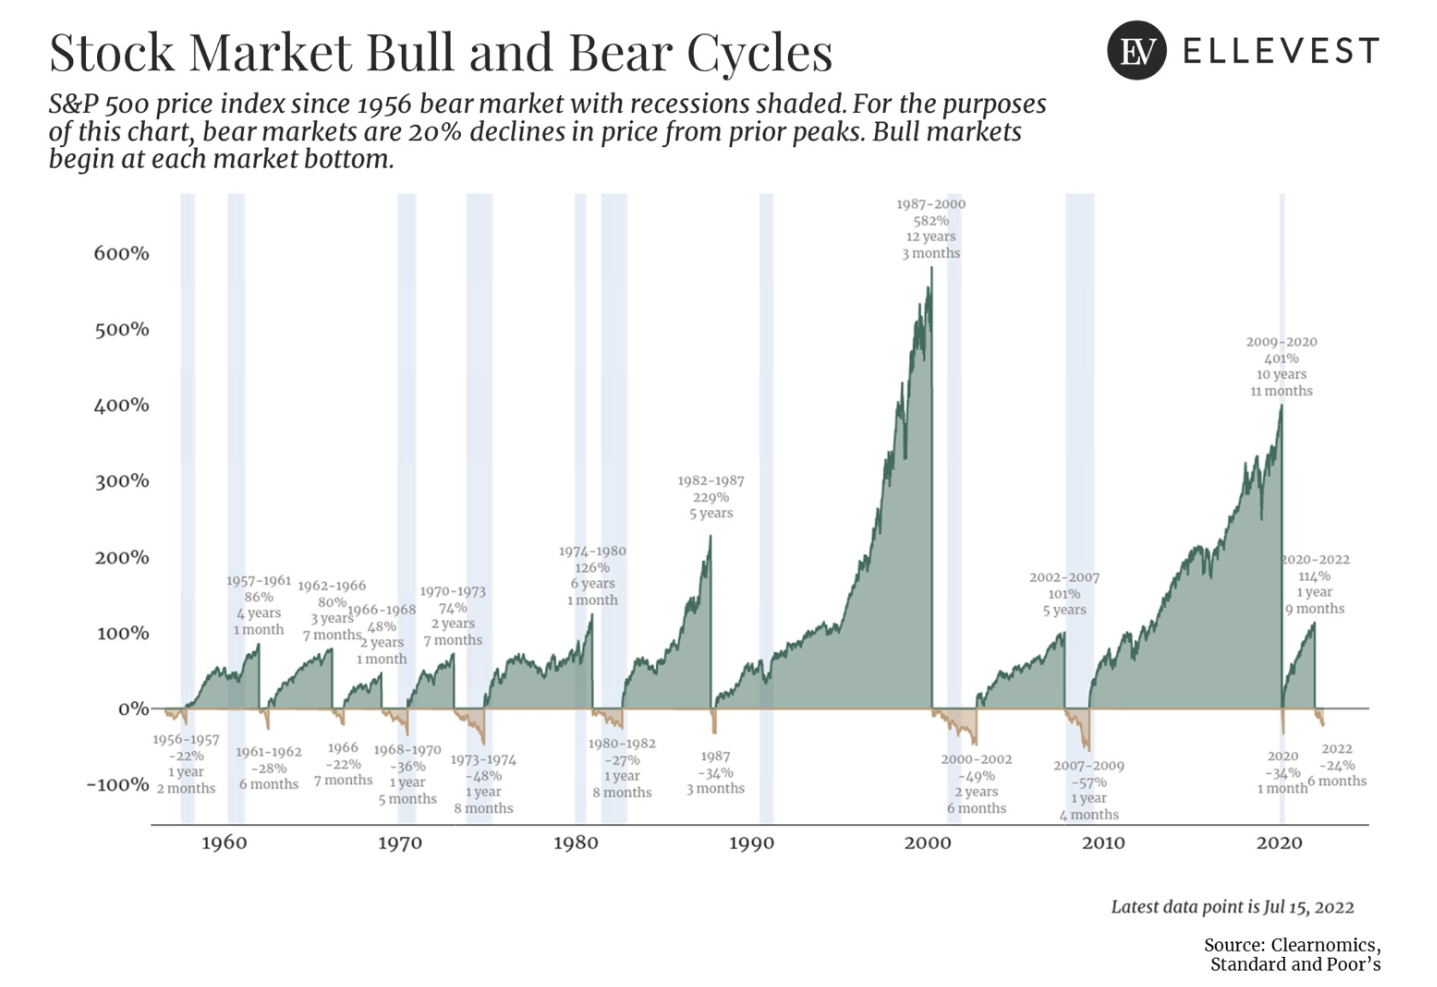 A graph that charts stock market bull and bear cycles from 1956 to present.